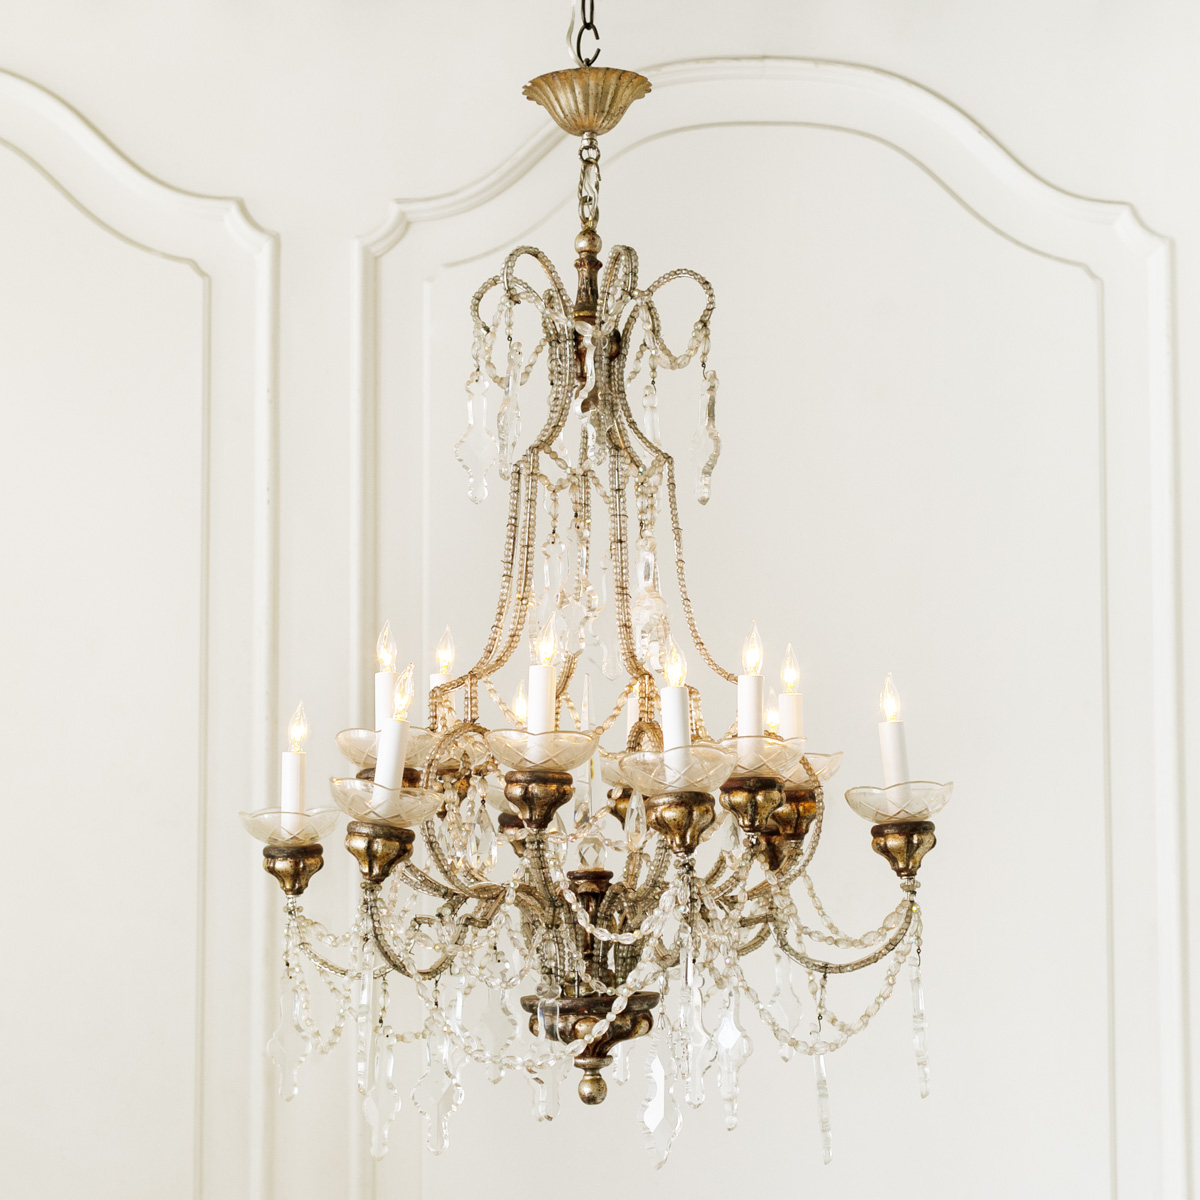 Casting Light and Elegance with the Timeless Appeal of Chandeliers